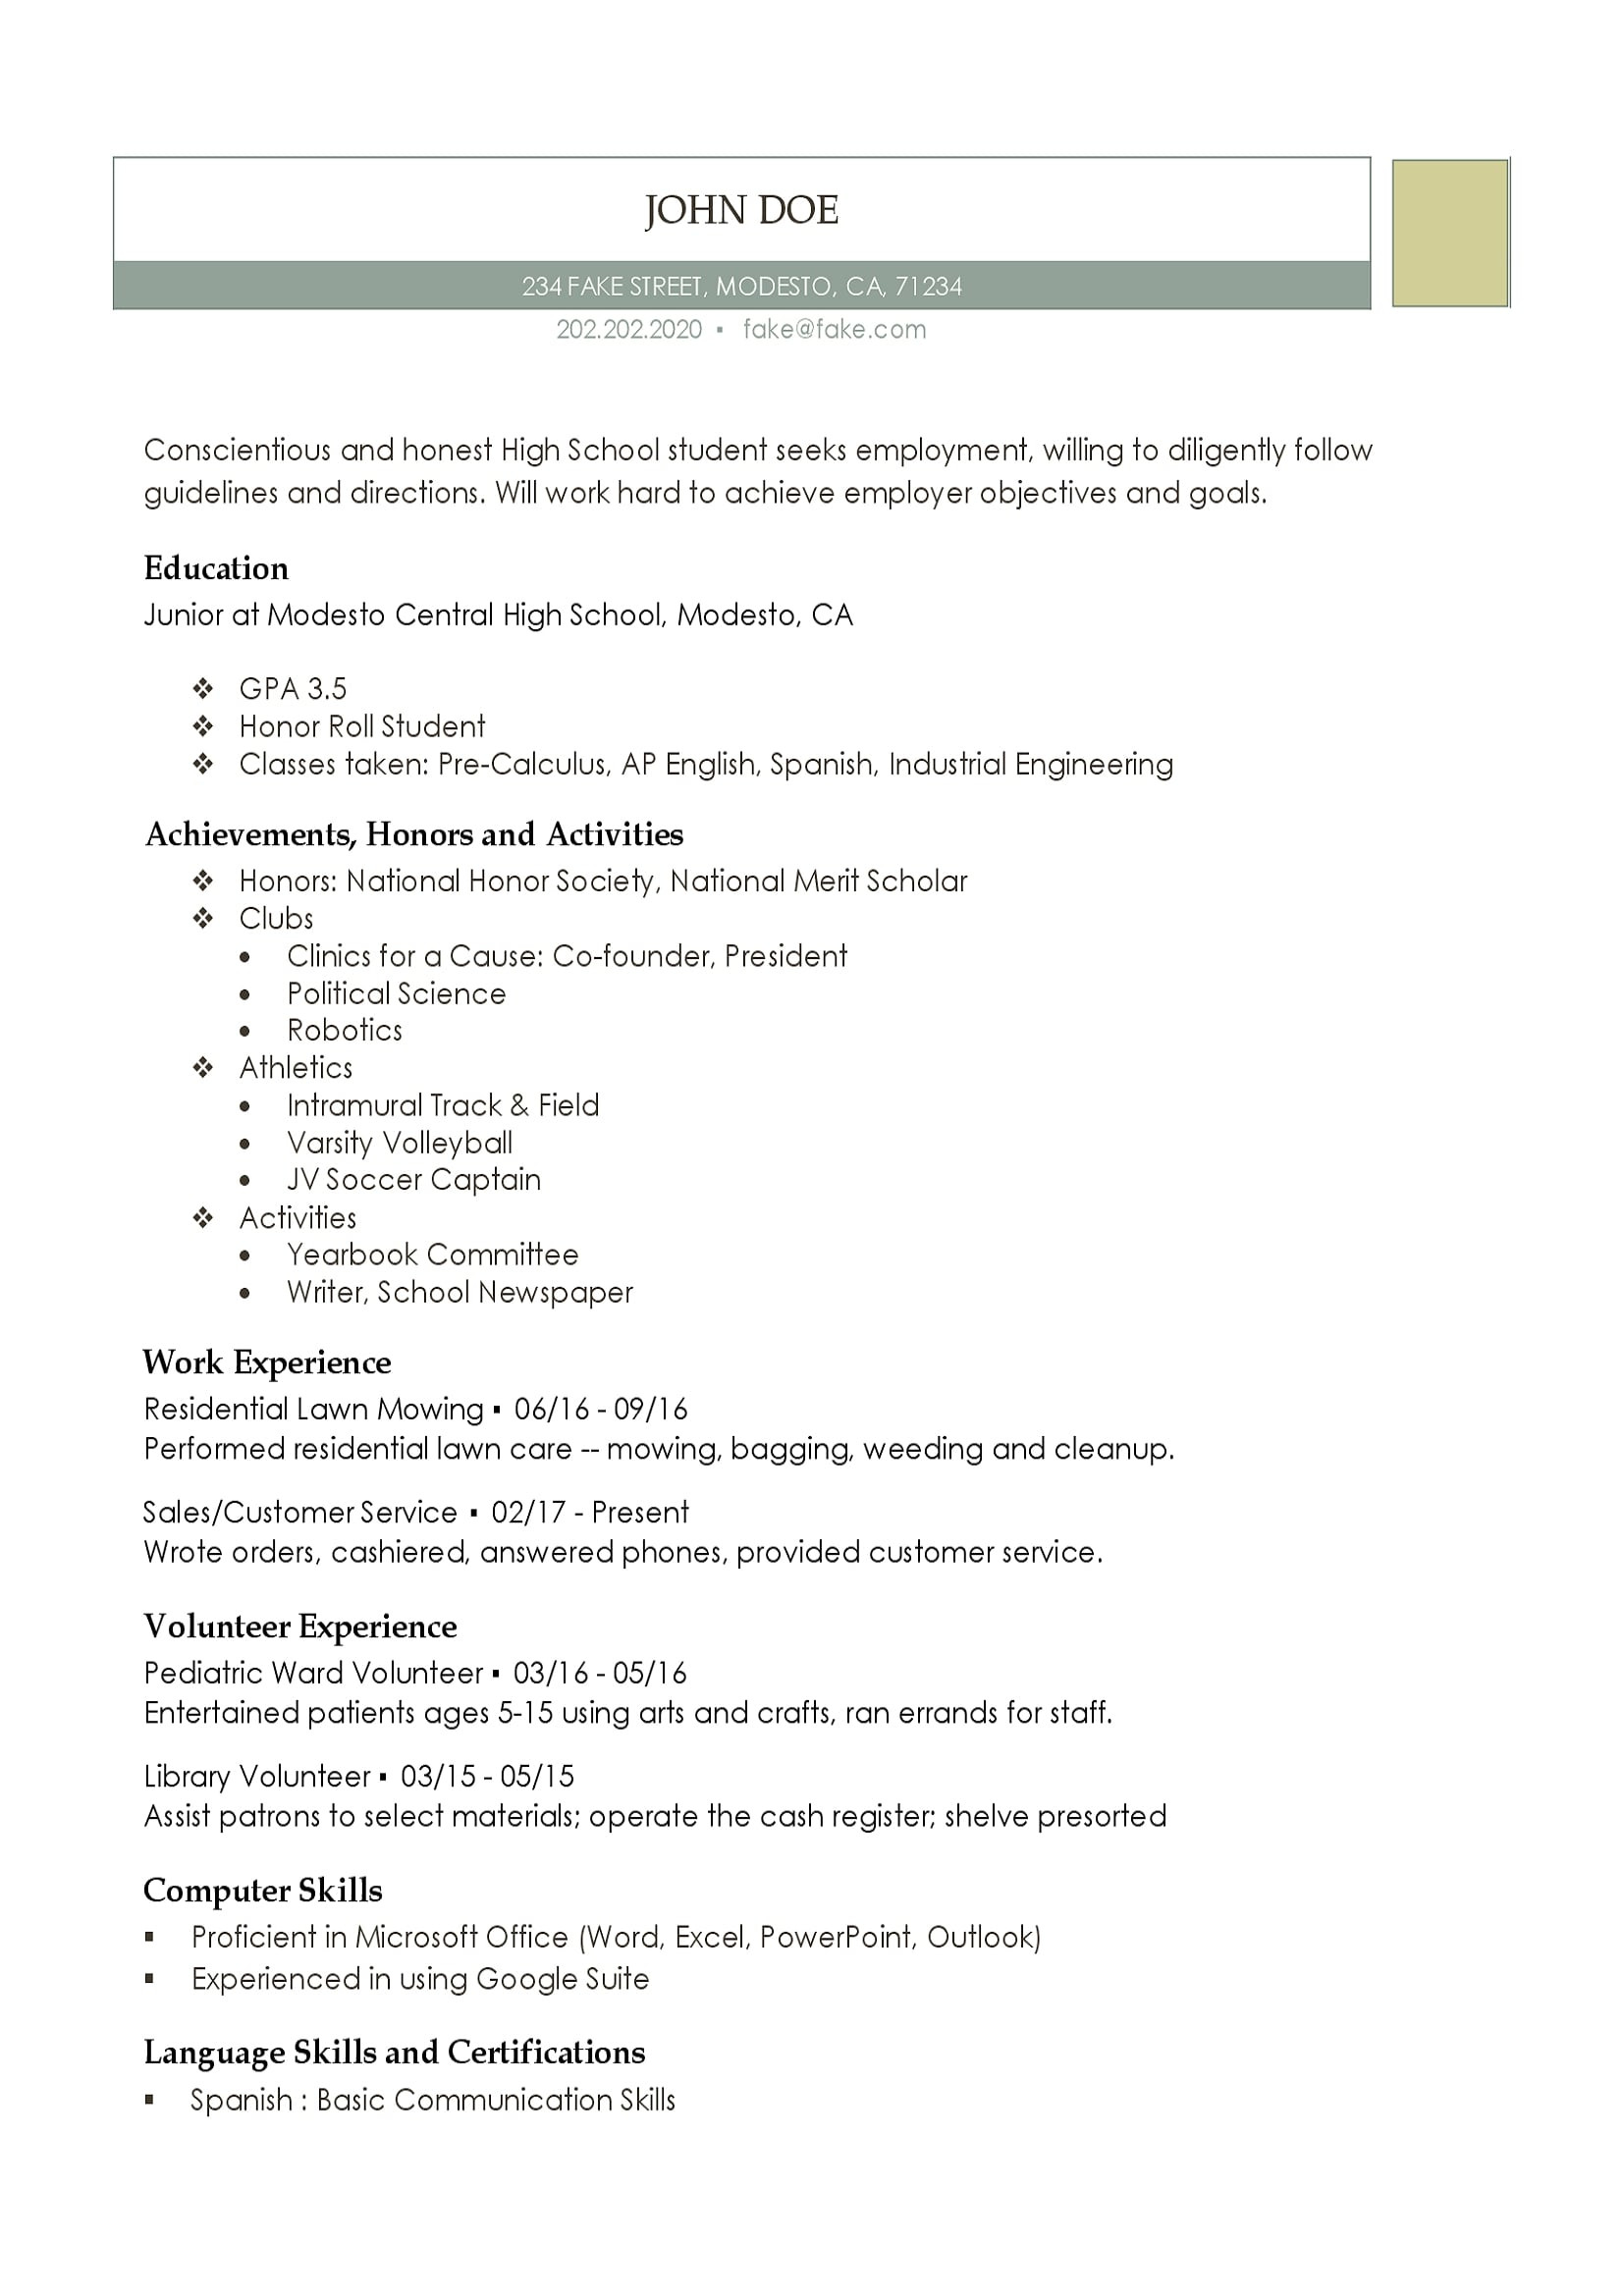 College Resume Template High School Senior High School Resume – Resume Templates for High School Students and …